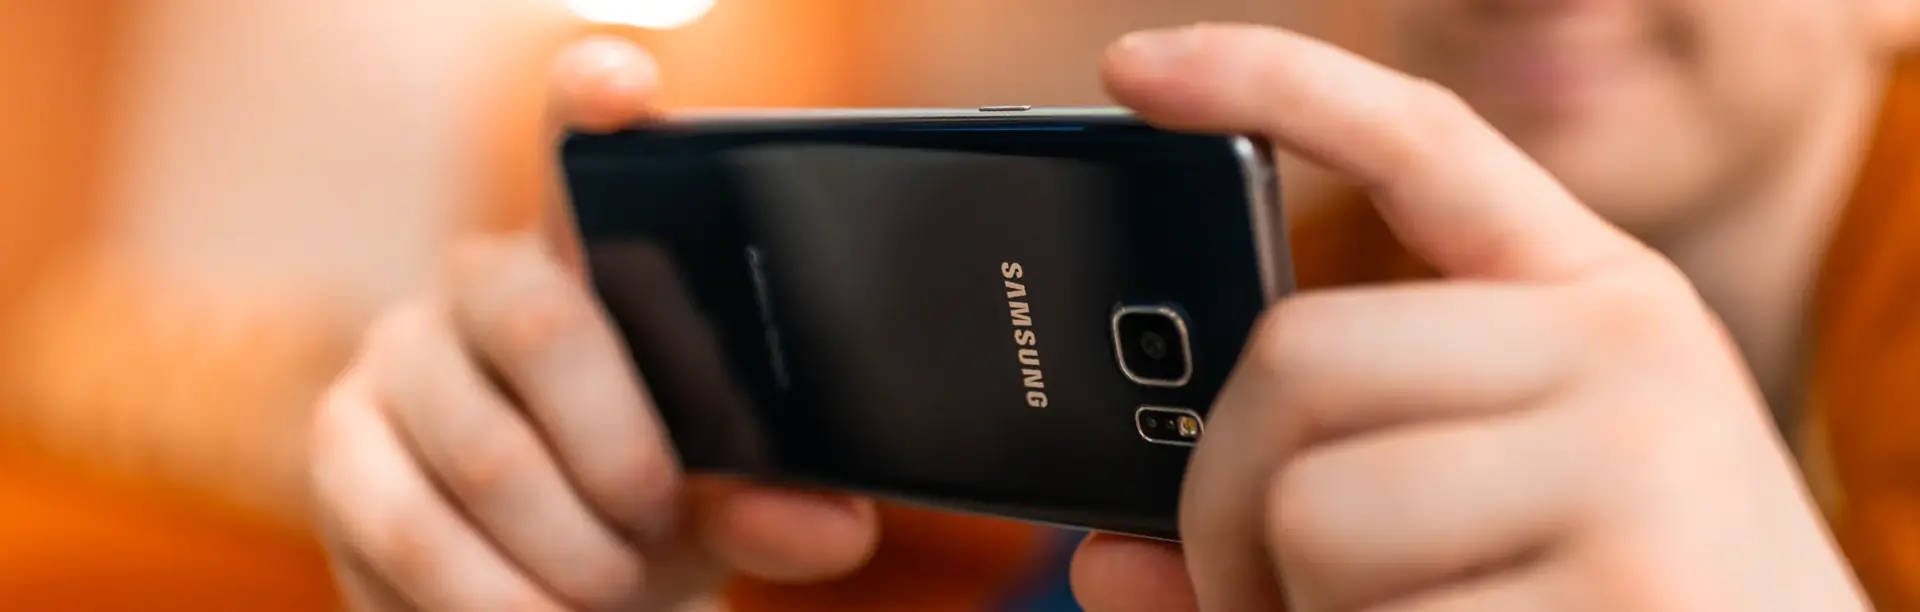 close-up of person on a Samsung phone